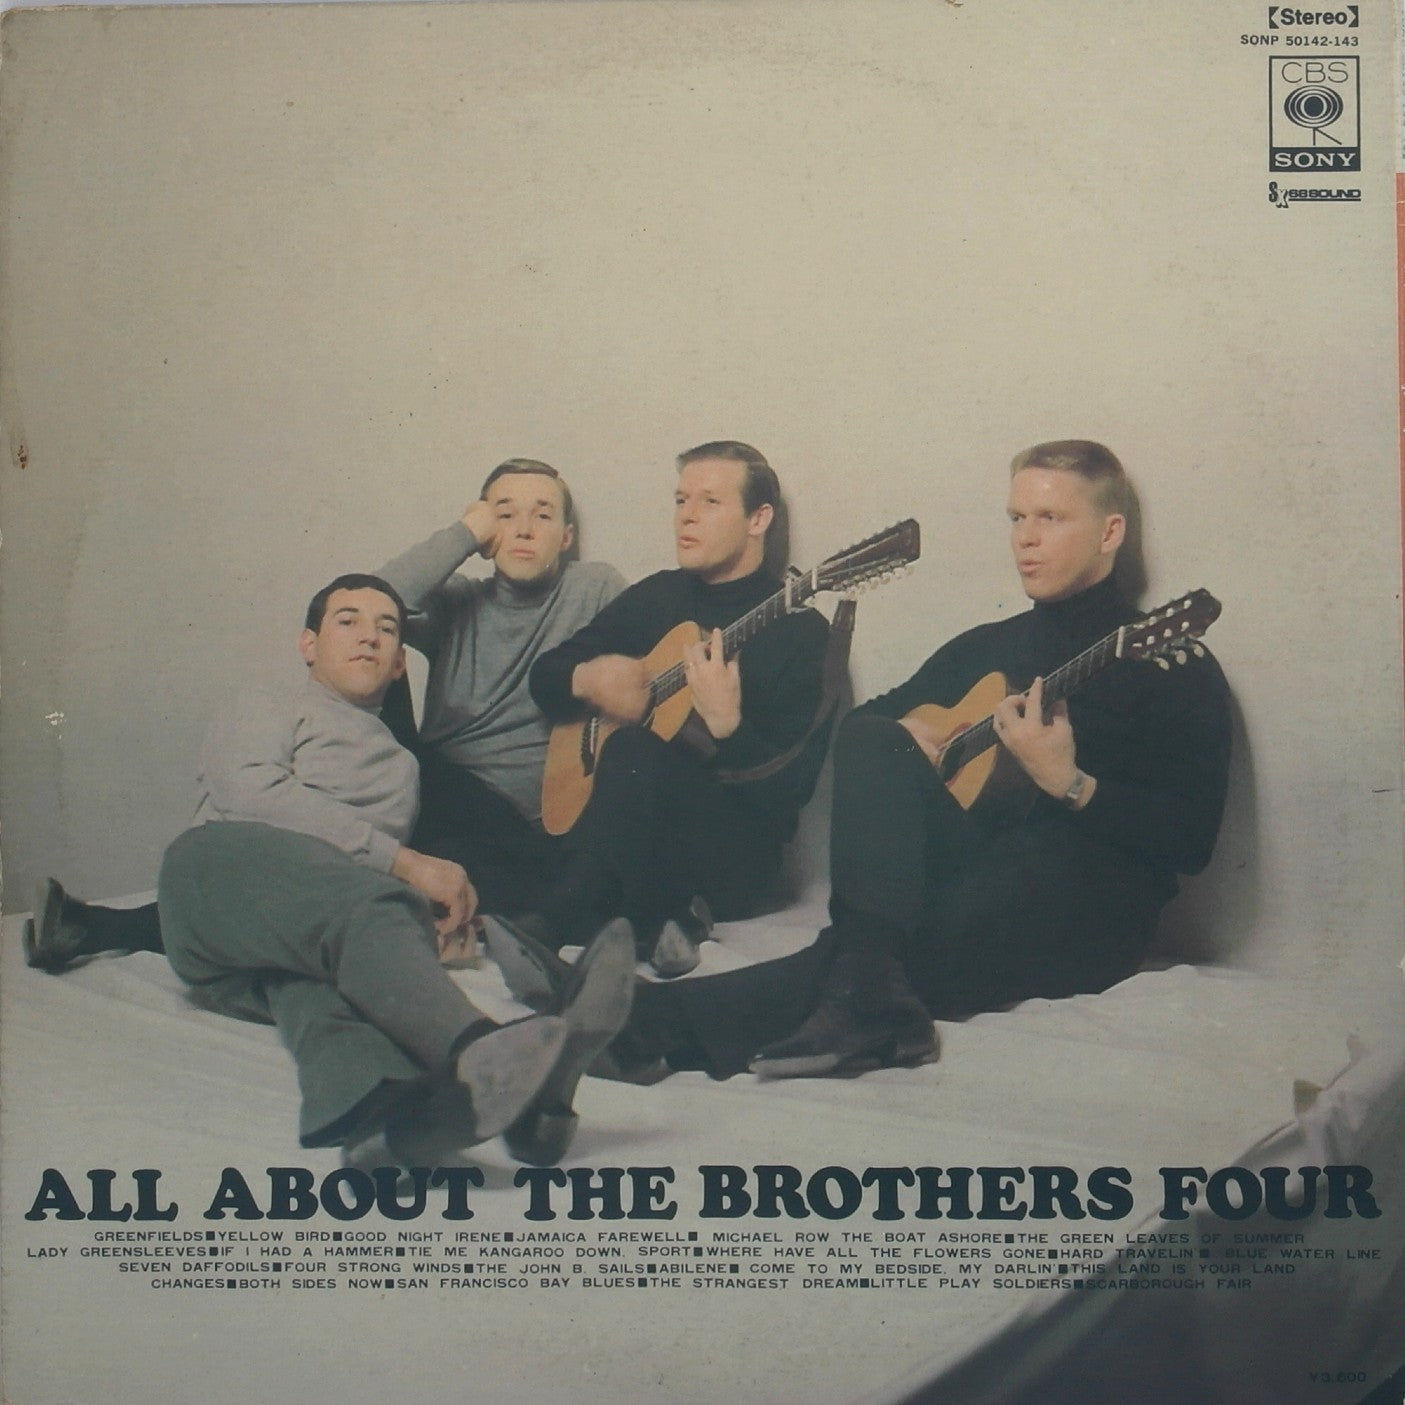 THE BROTHERS FOUR - All About The Brothers Four